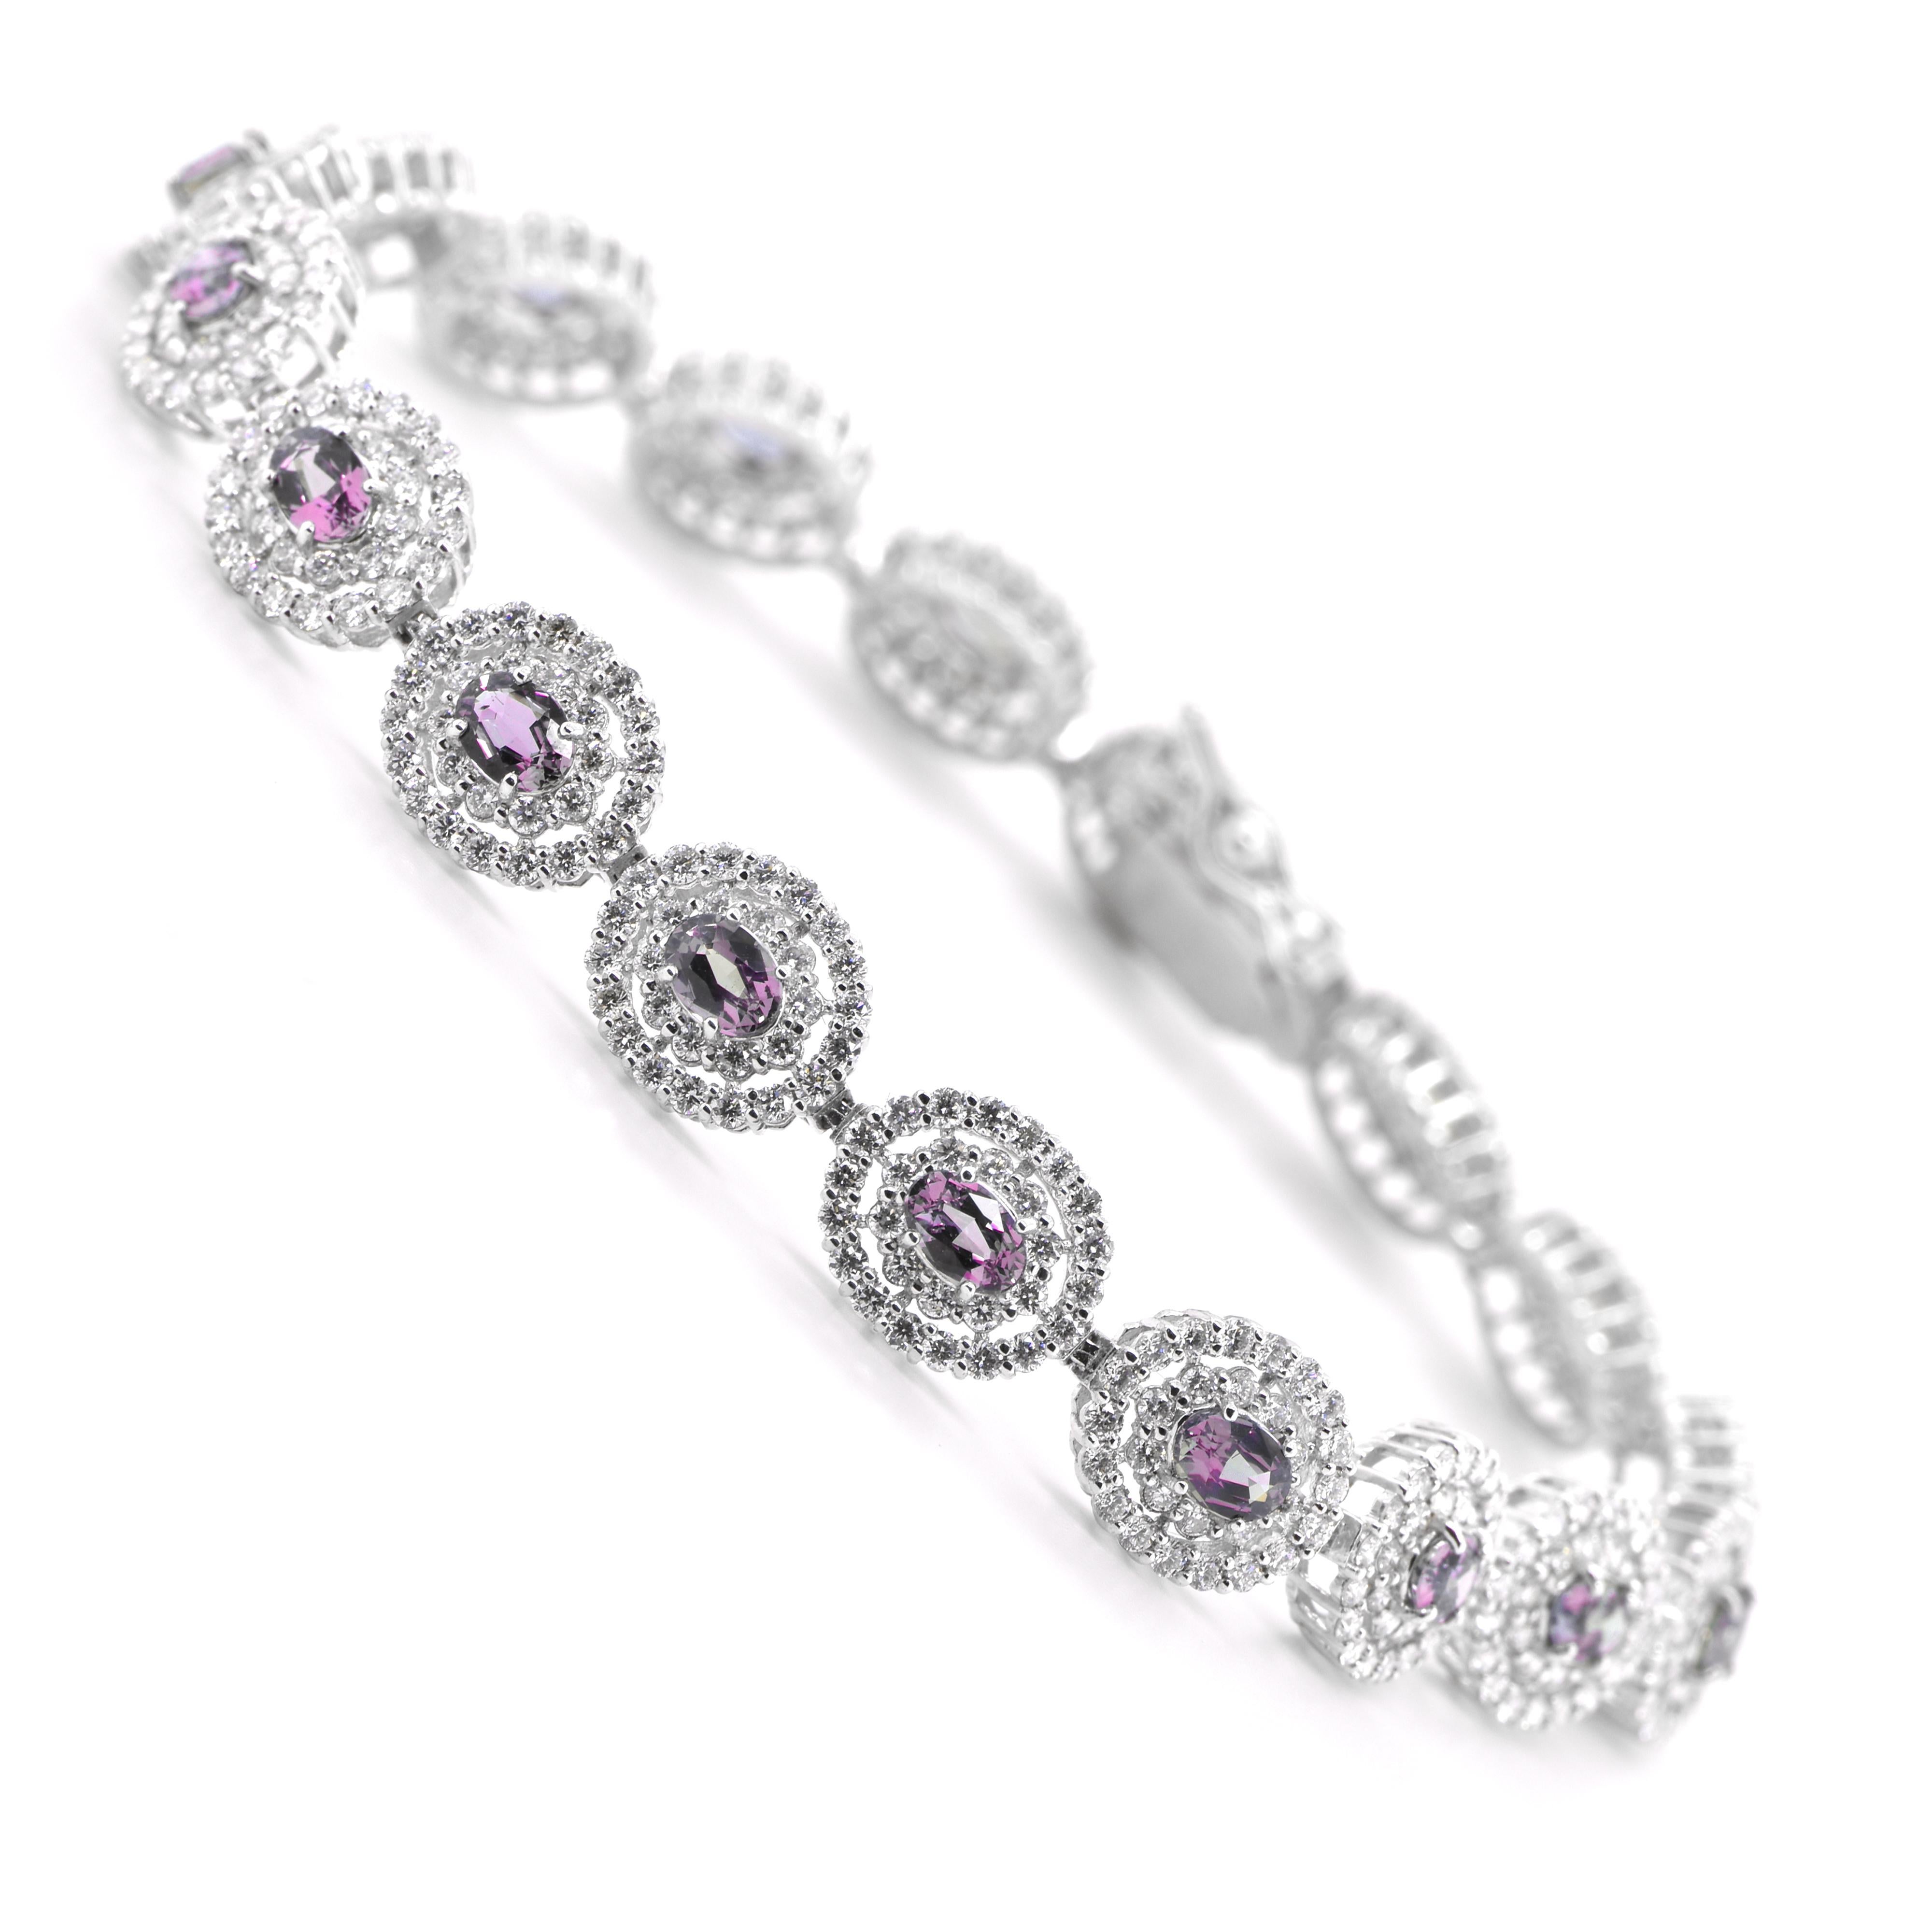 A gorgeous Bracelet featuring a total of 2.93 Carats Natural Alexandrite and 3.30 Carats of Diamond Accents set in Platinum. Alexandrites produce a natural color-change phenomenon as they exhibit a Bluish Green Color under Fluorescent Light whereas